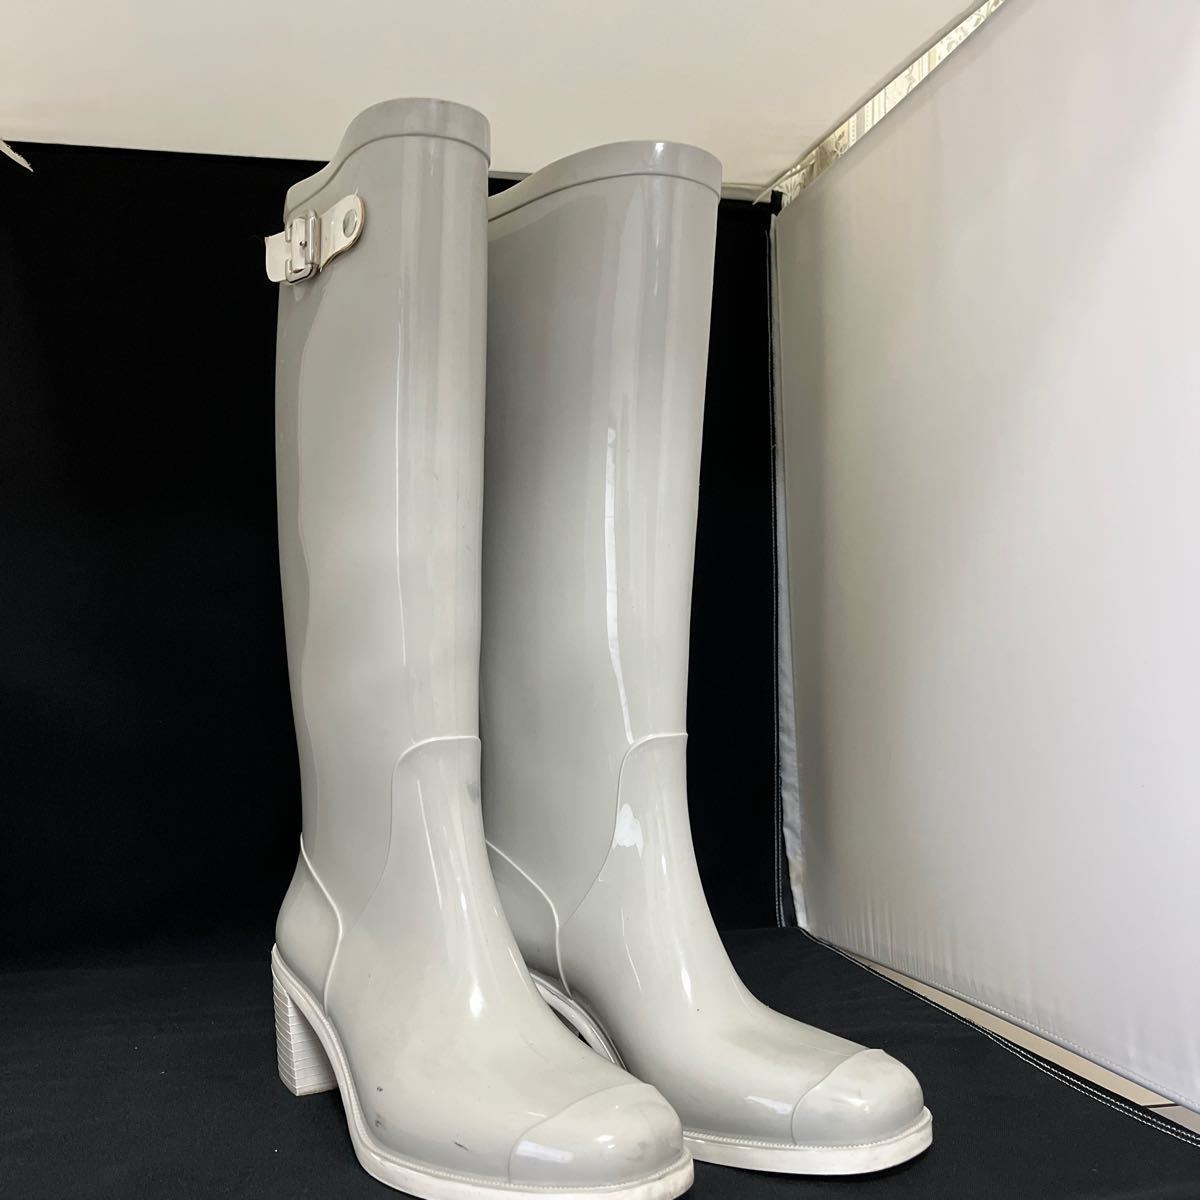  rain boots long height Raver light gray MADE IN ITALY long boots rain shoes size 36